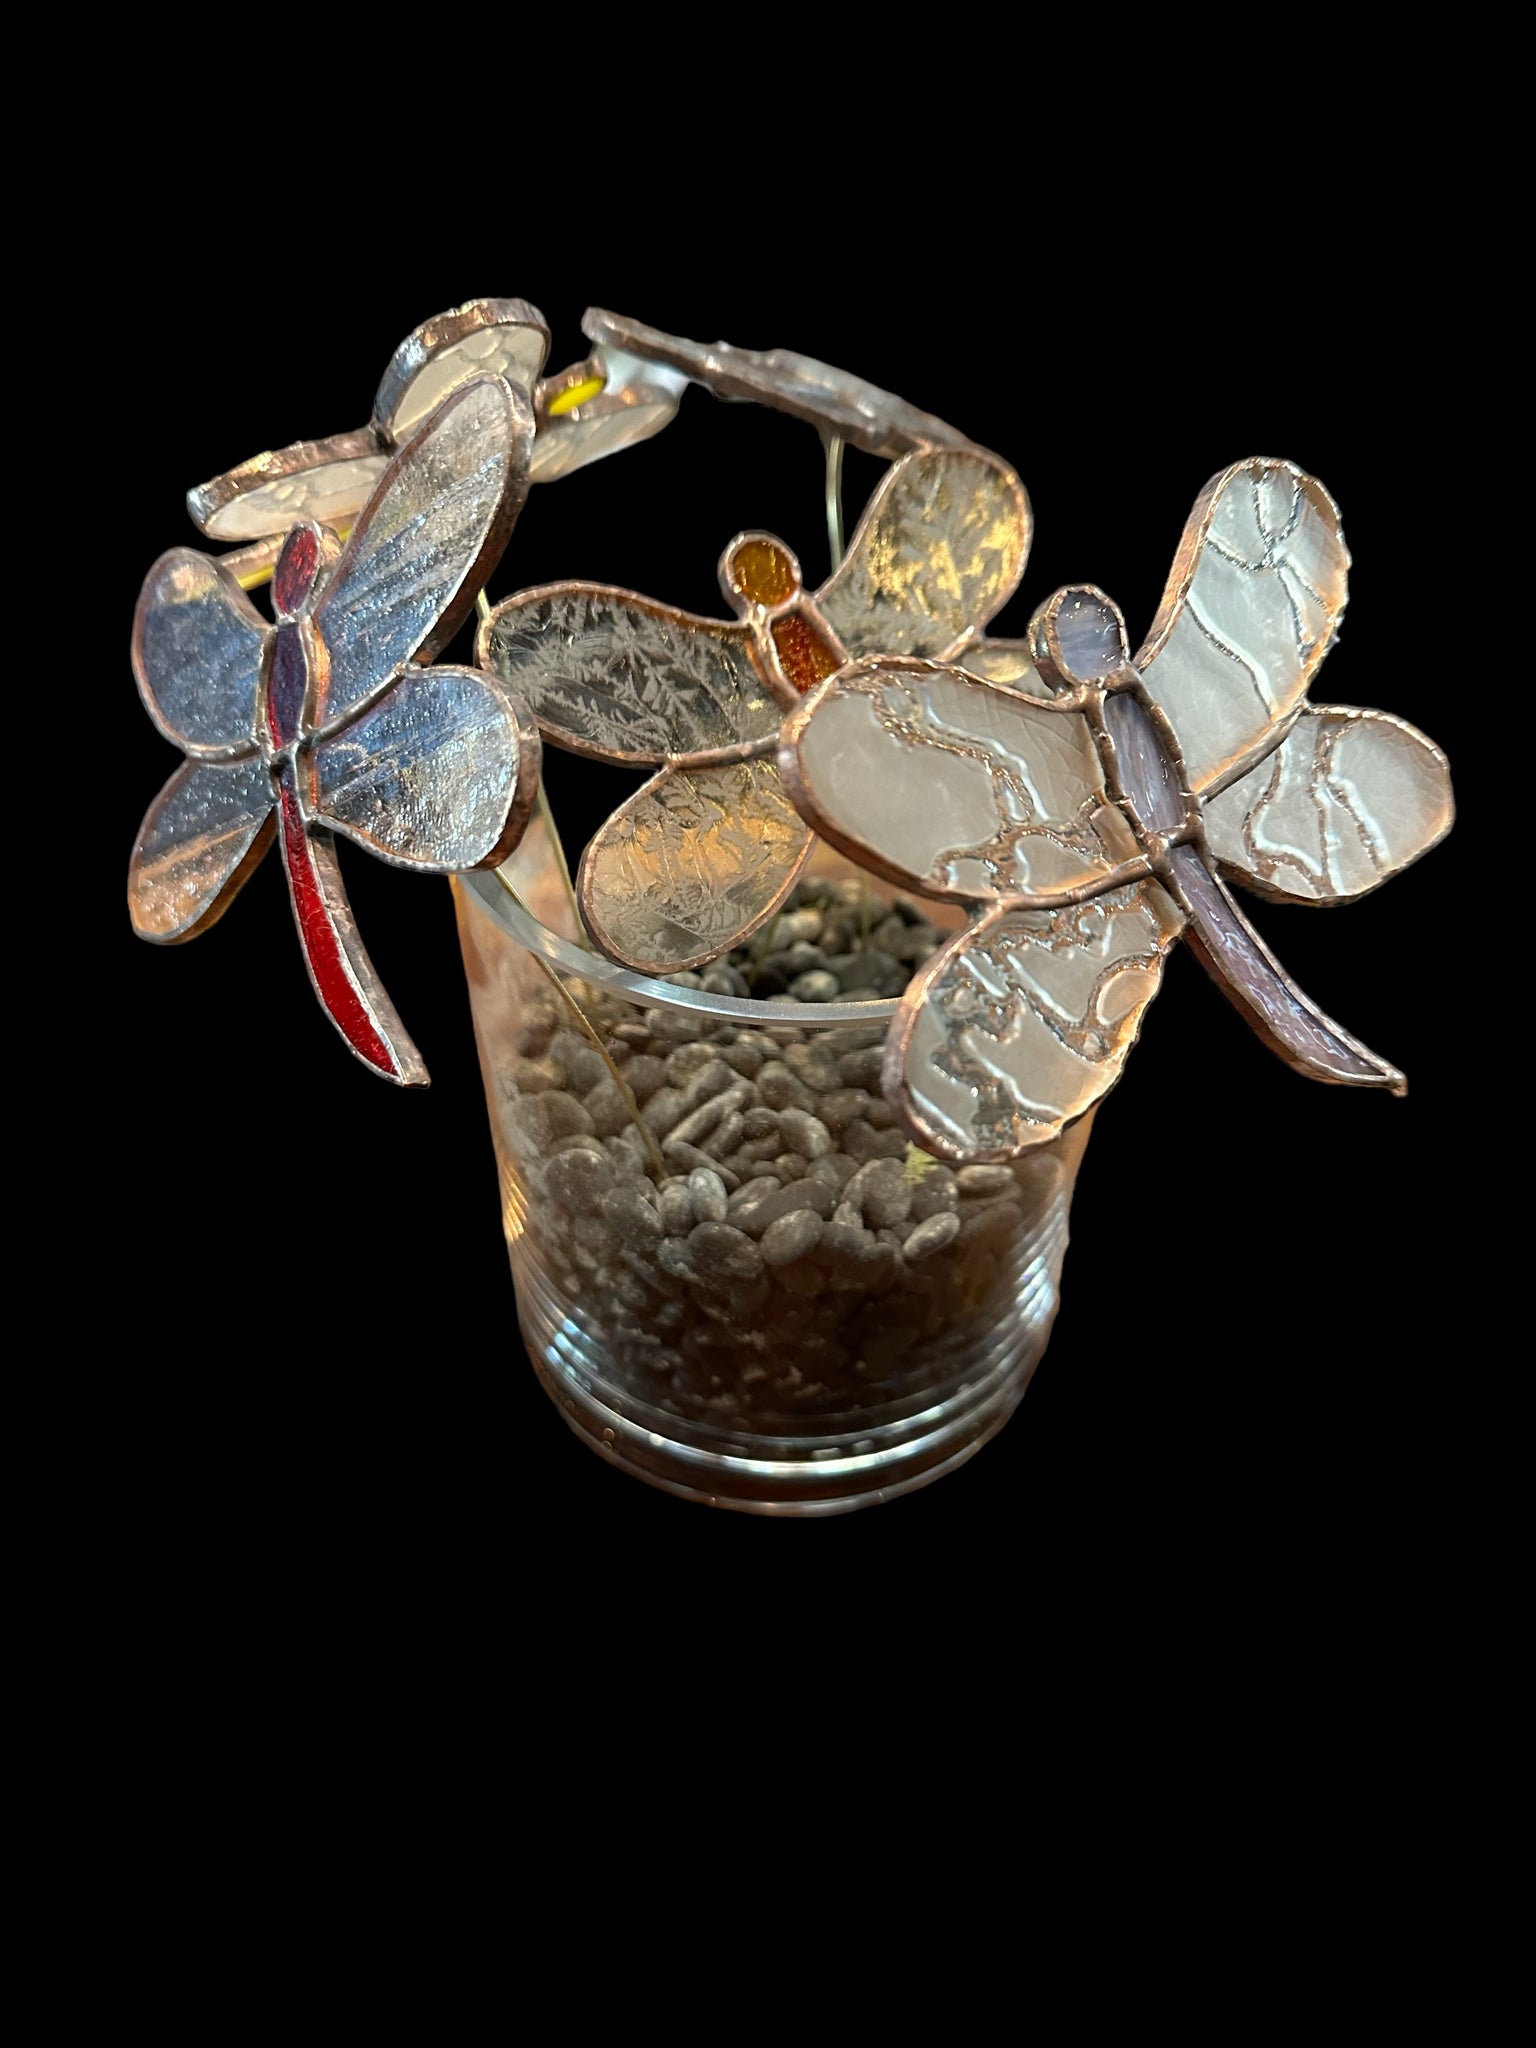 AGlazing Art - Dragonfly Stained Glass Plant Decor